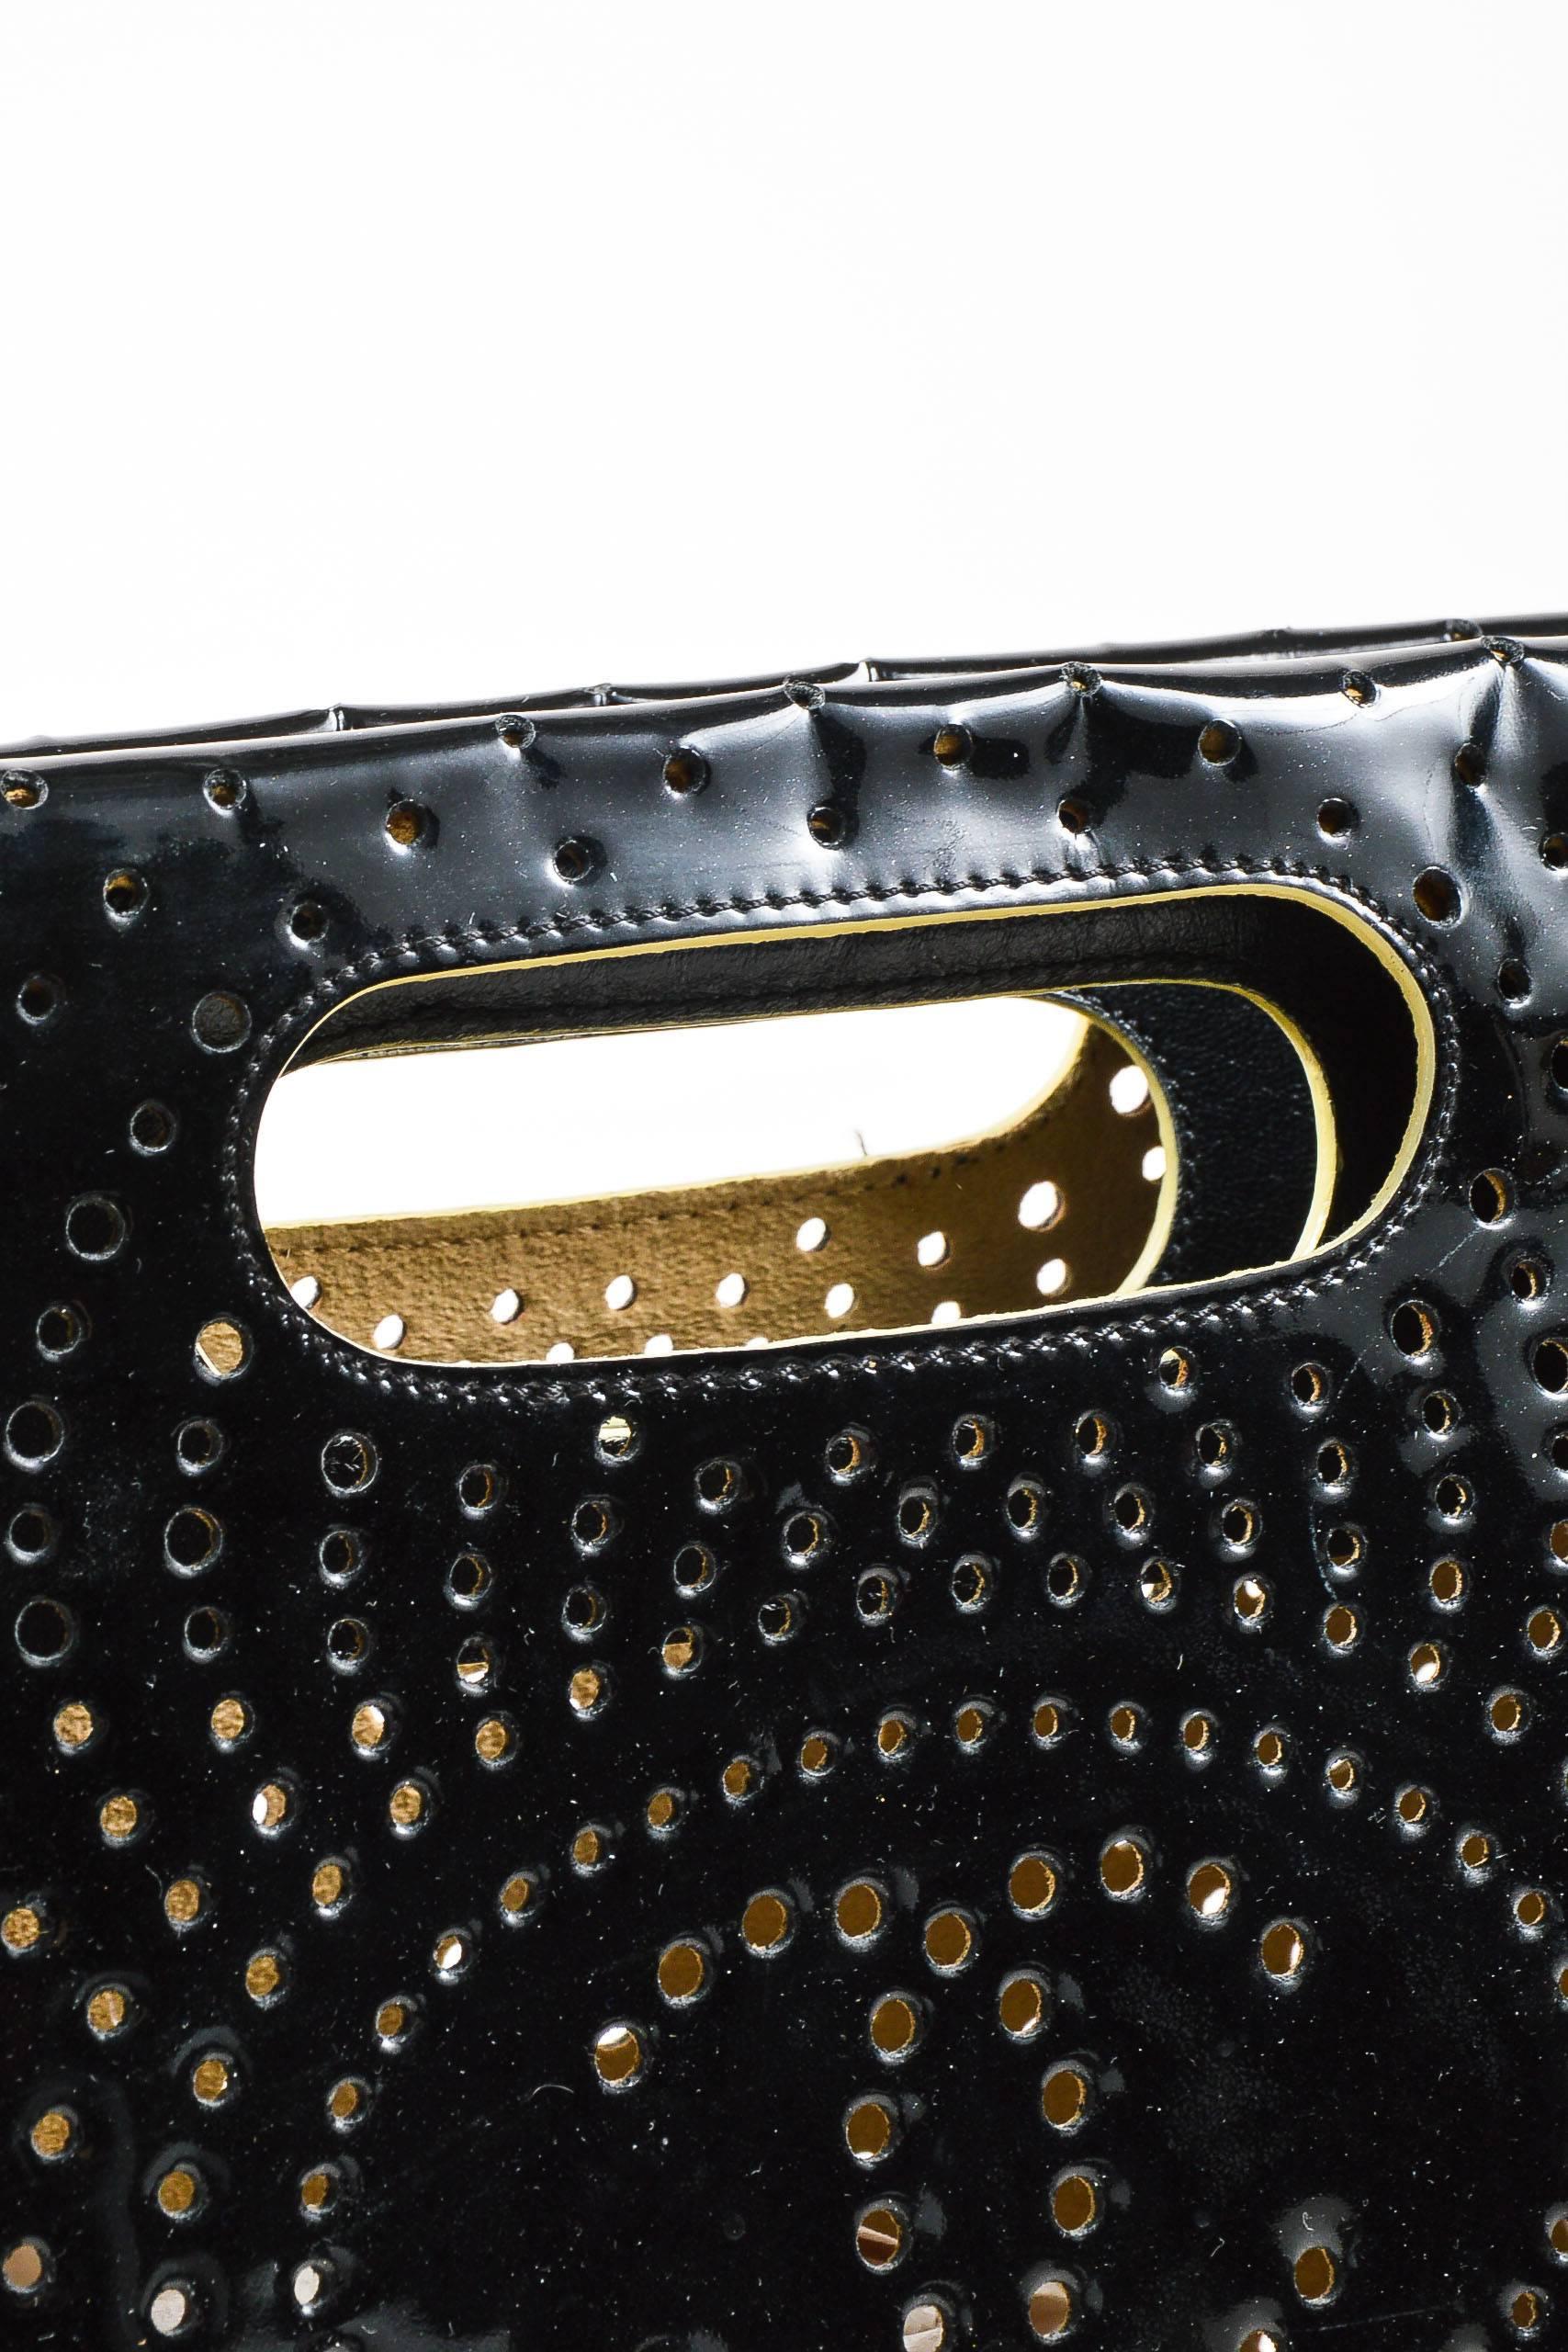 Chanel Black Perforated Patent Leather 'CC' Logo Clutch Handbag In Good Condition For Sale In Chicago, IL